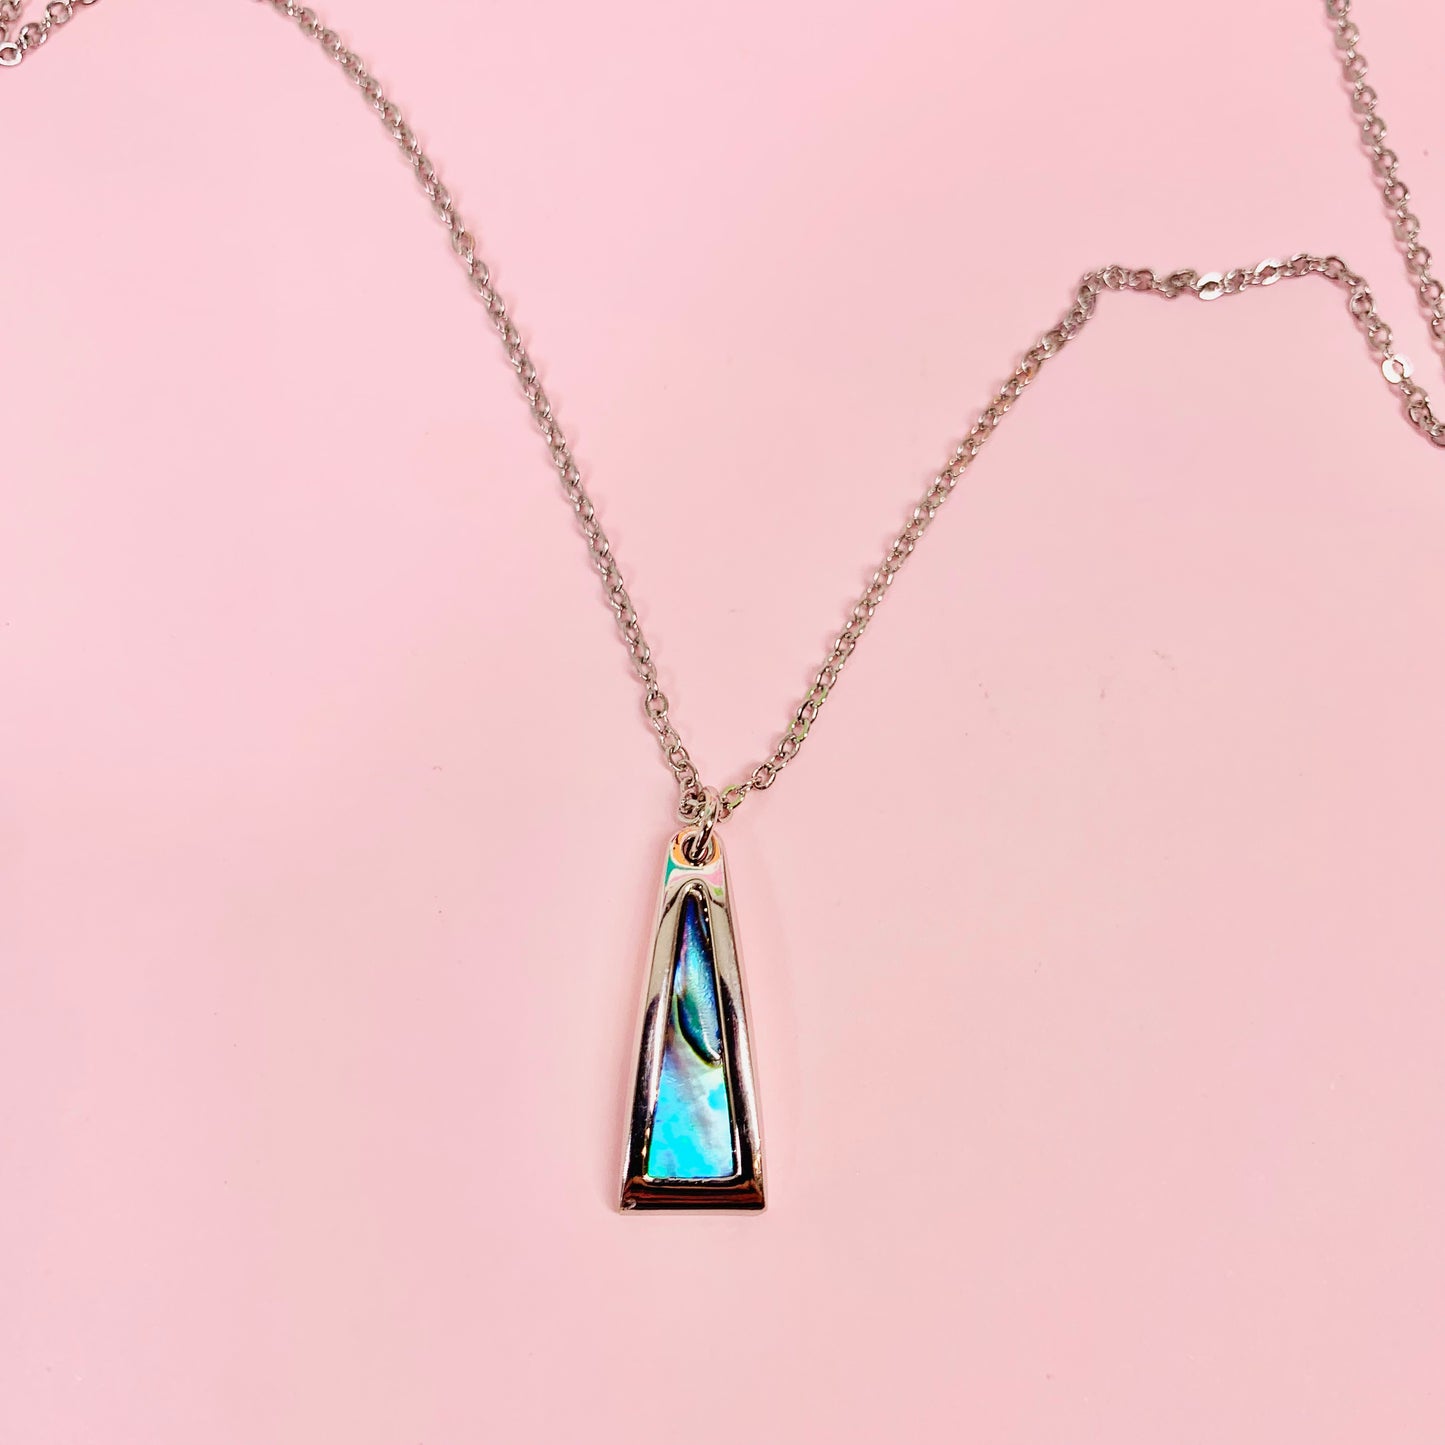 1980s silver plated chain with blue drop pendant